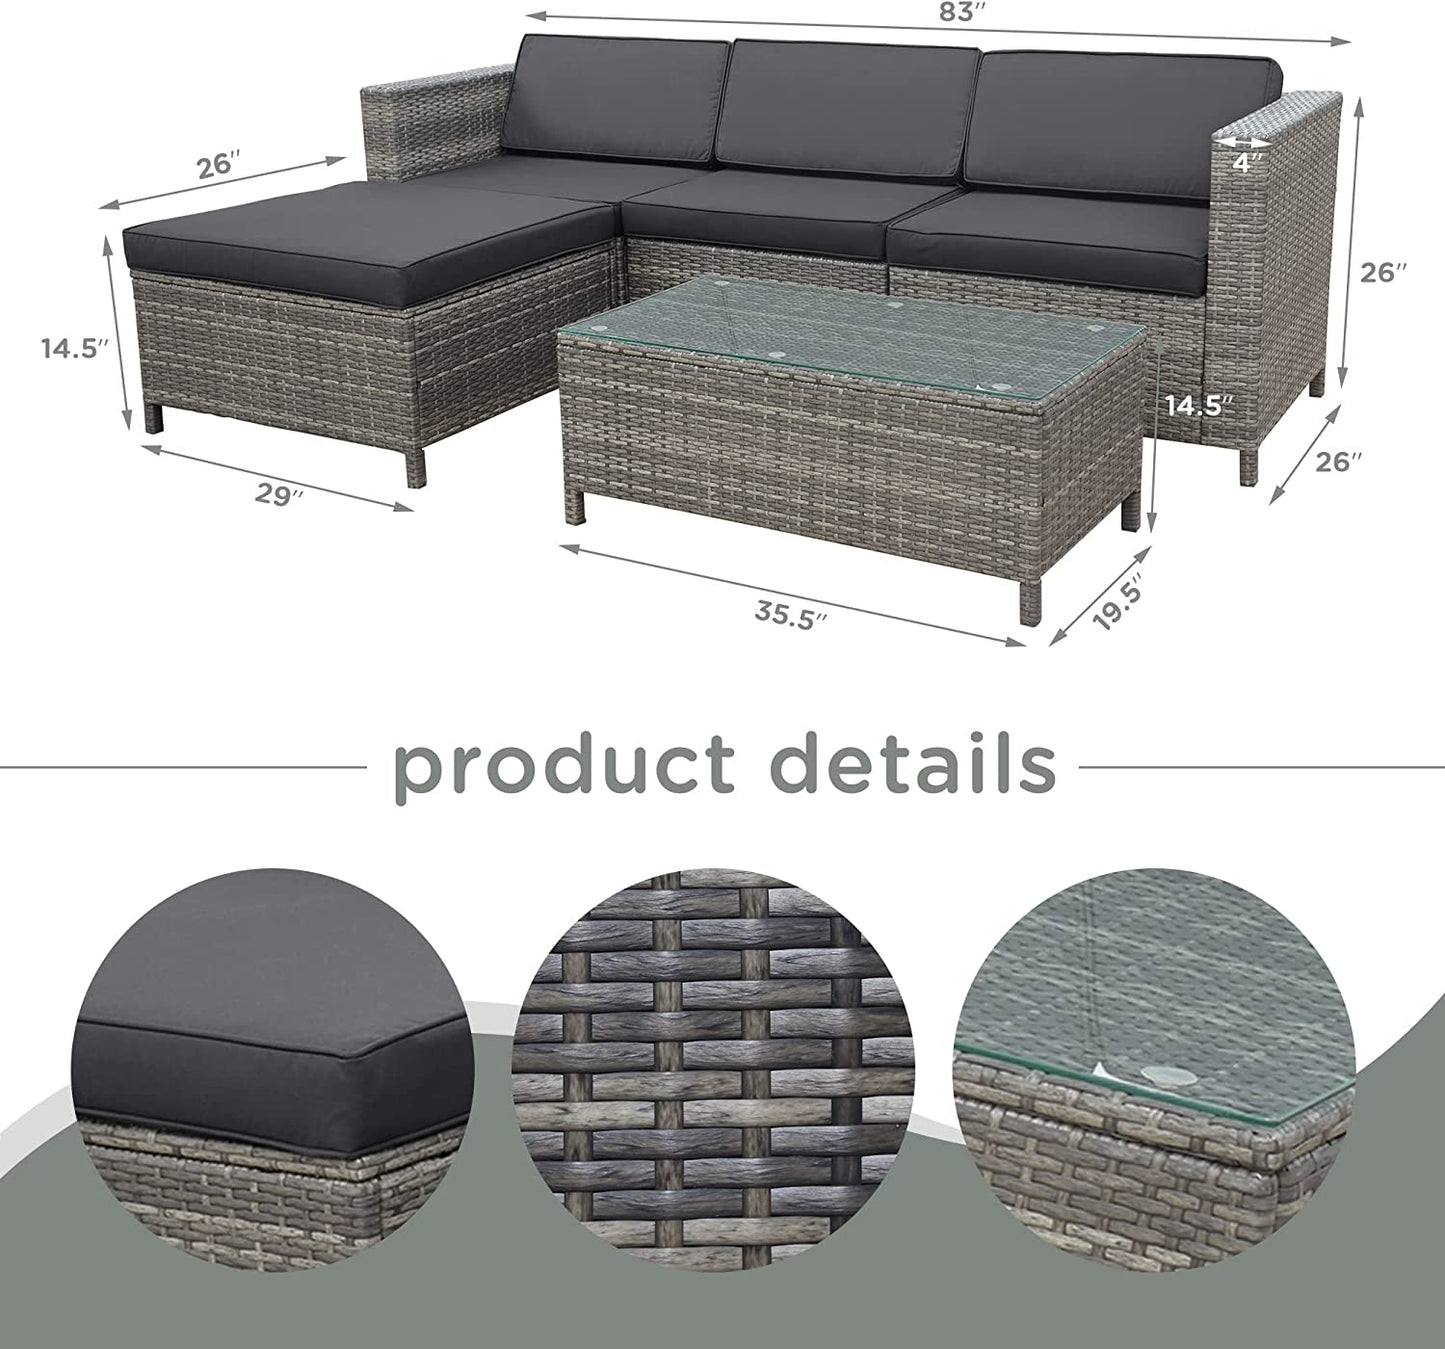 5 Pieces Patio Furniture Sets All Weather Outdoor Sectional Sofa Manual Weaving Wicker Rattan Patio Conversation Set with Washable Cushions and Glass Table